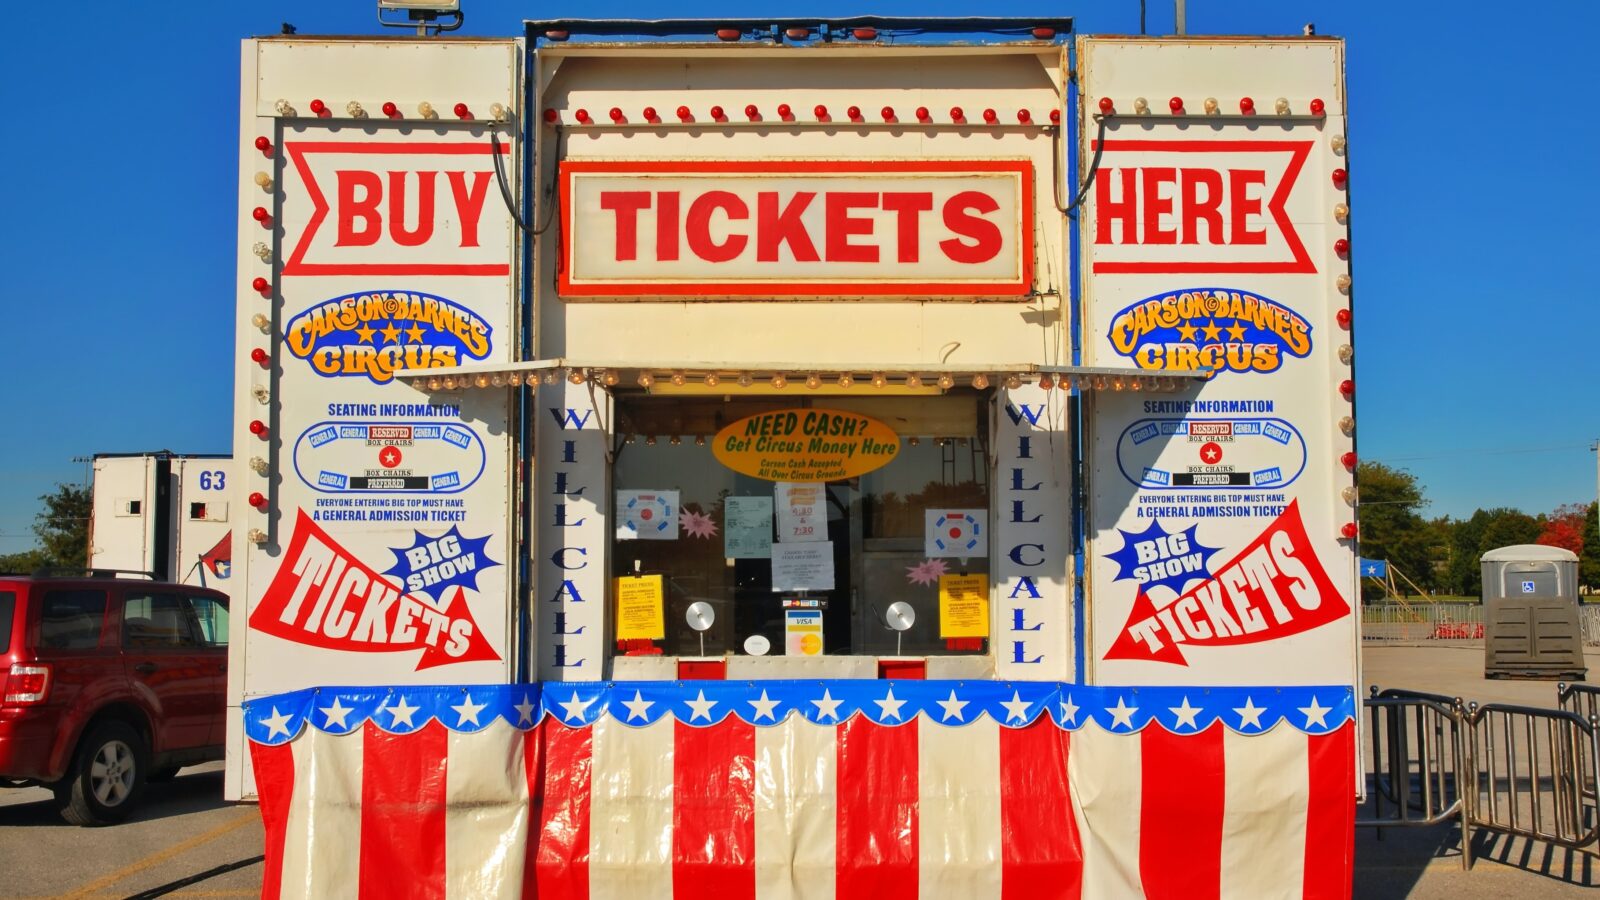 a brightly colored fair booth in the colors of the American flag with big signs that say "Buy Tickets Here"